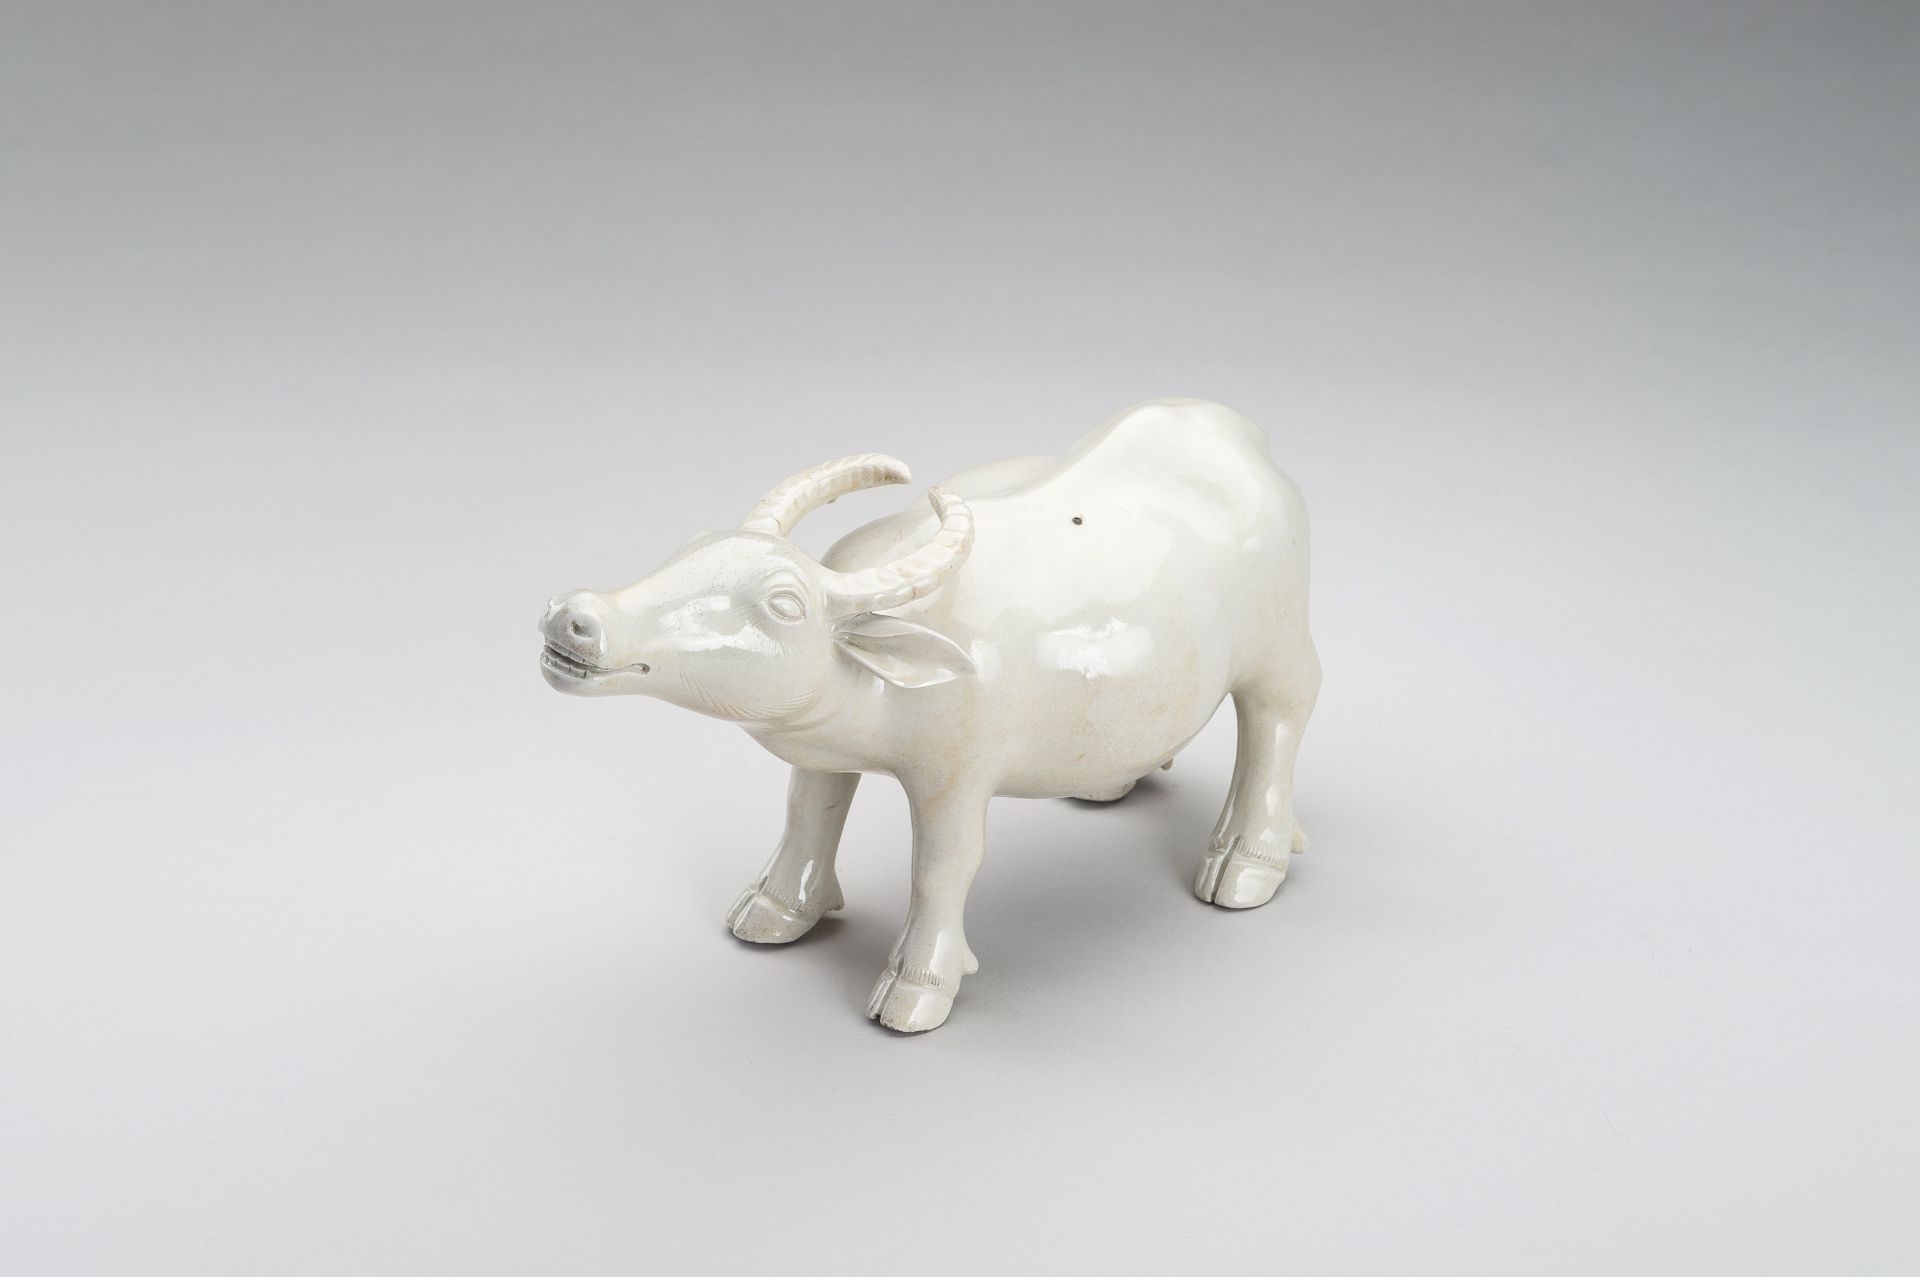 A DEHUA FIGURE OF AN OX, QING DYNASTY - Image 9 of 12